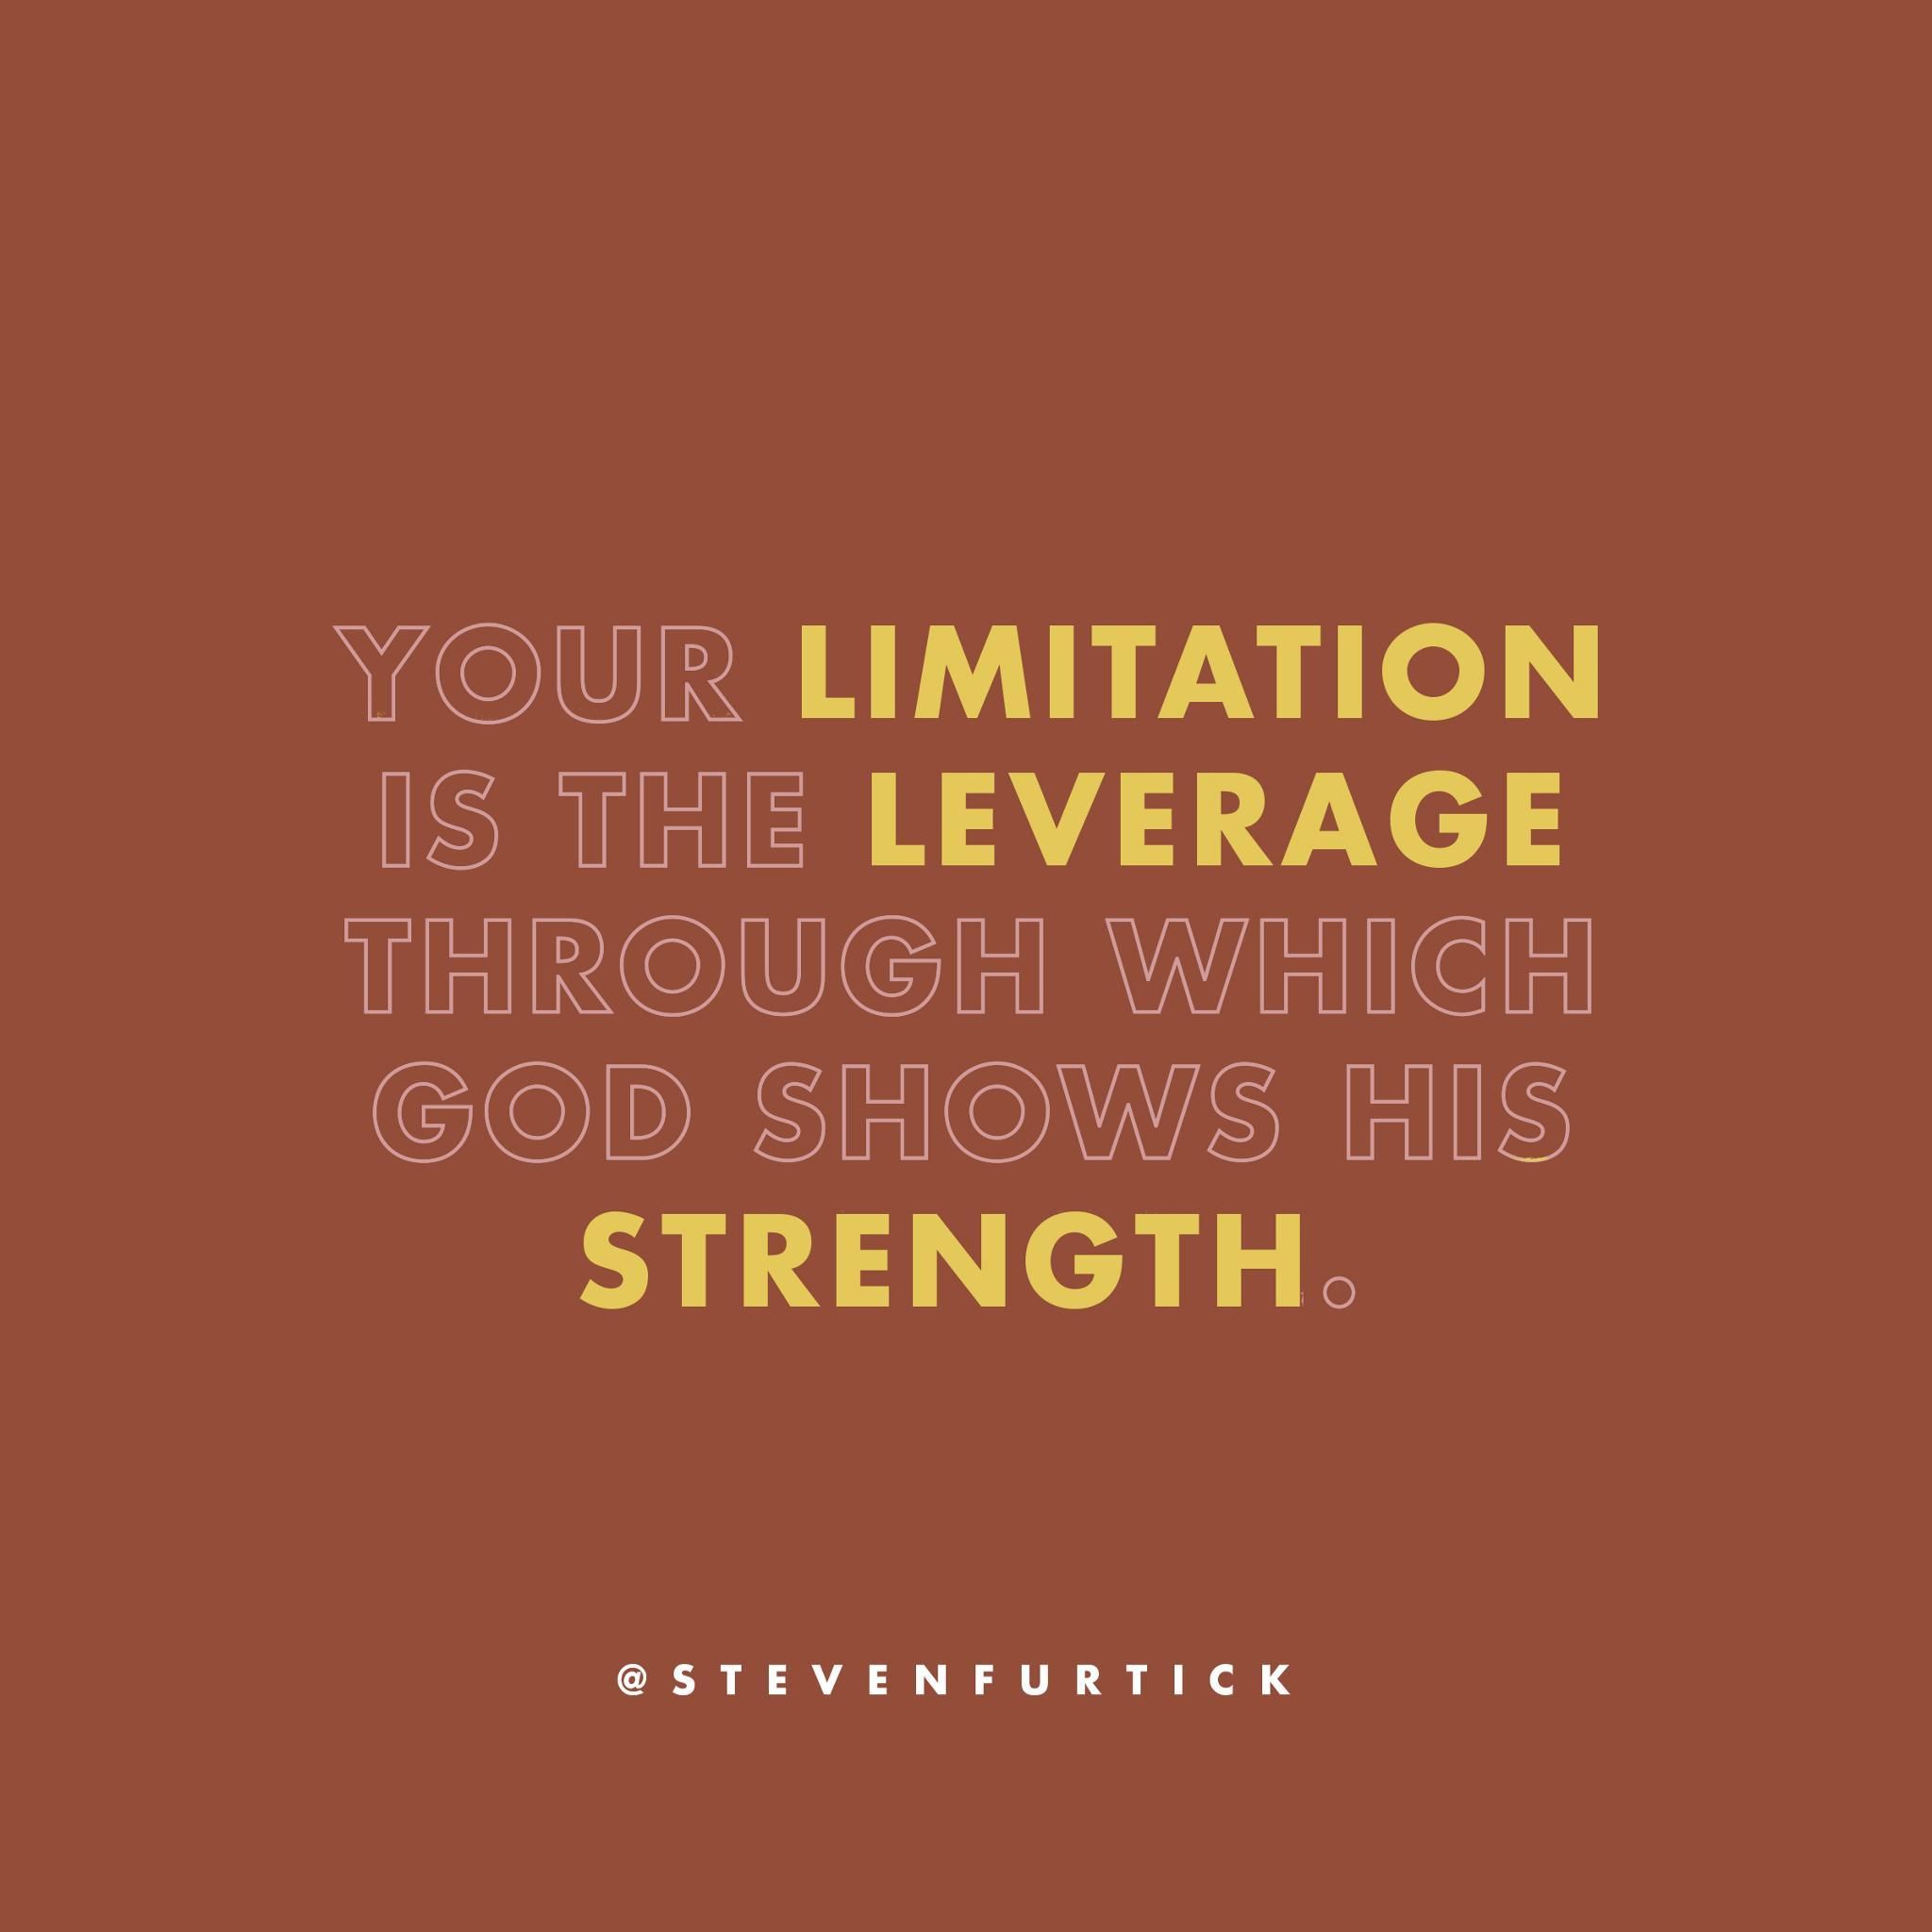 Your limitation is the leverage through which God shows his strength ...